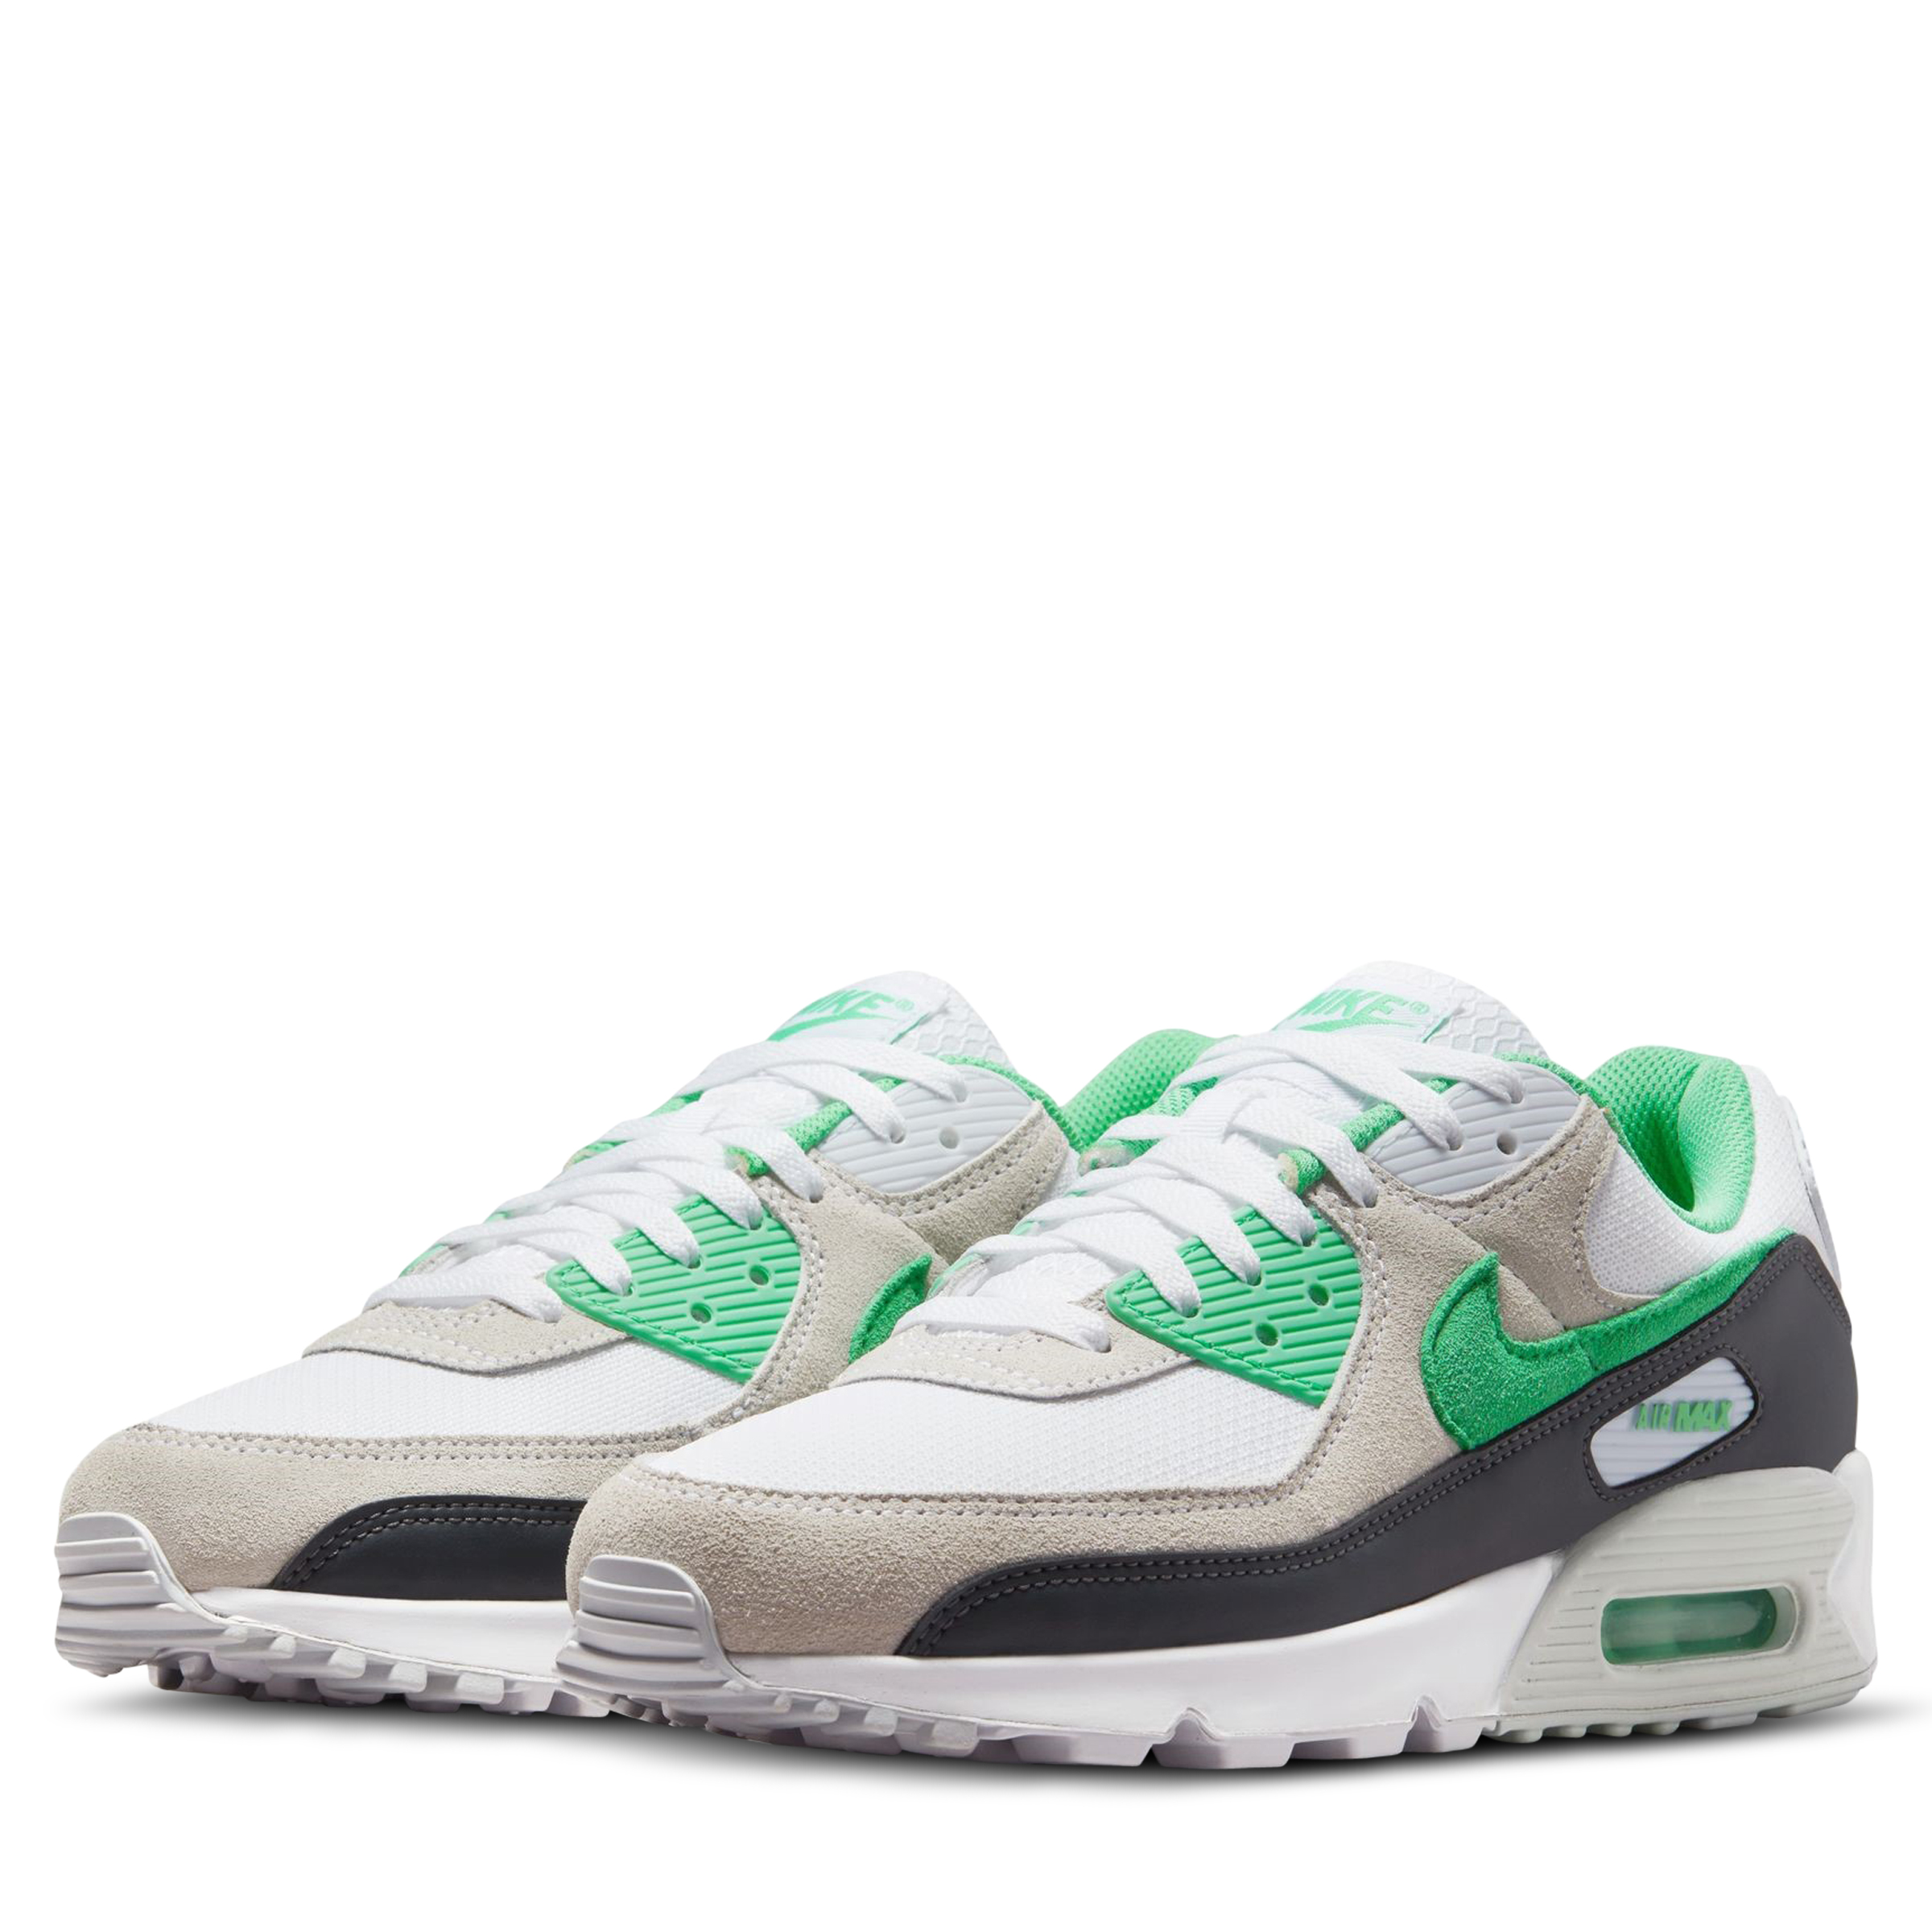 Nike Air Max 90 White/Spring Green/Anthracite | Hype DC